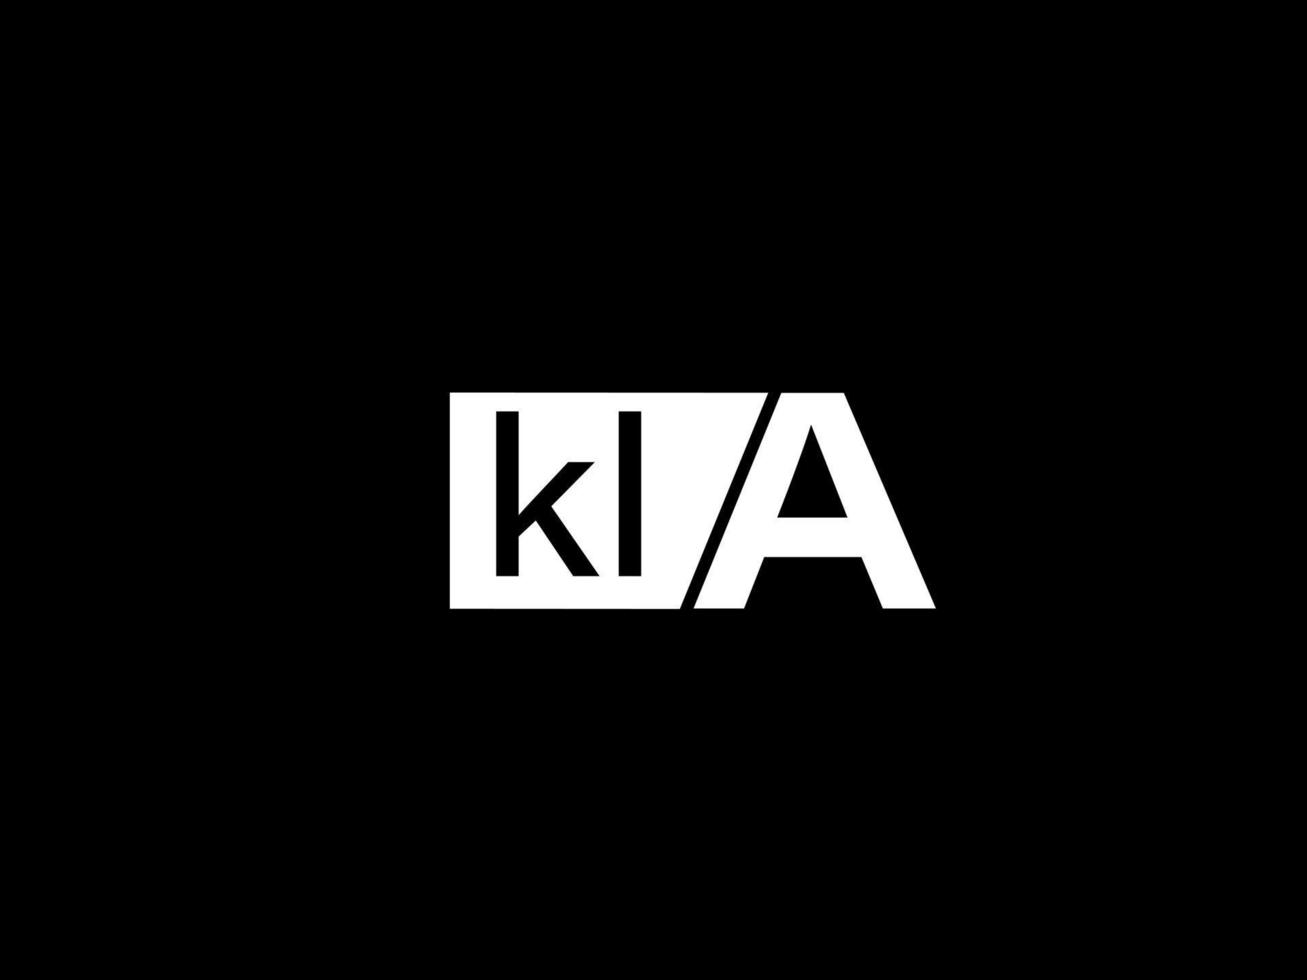 KLA Logo and Graphics design vector art, Icons isolated on black background